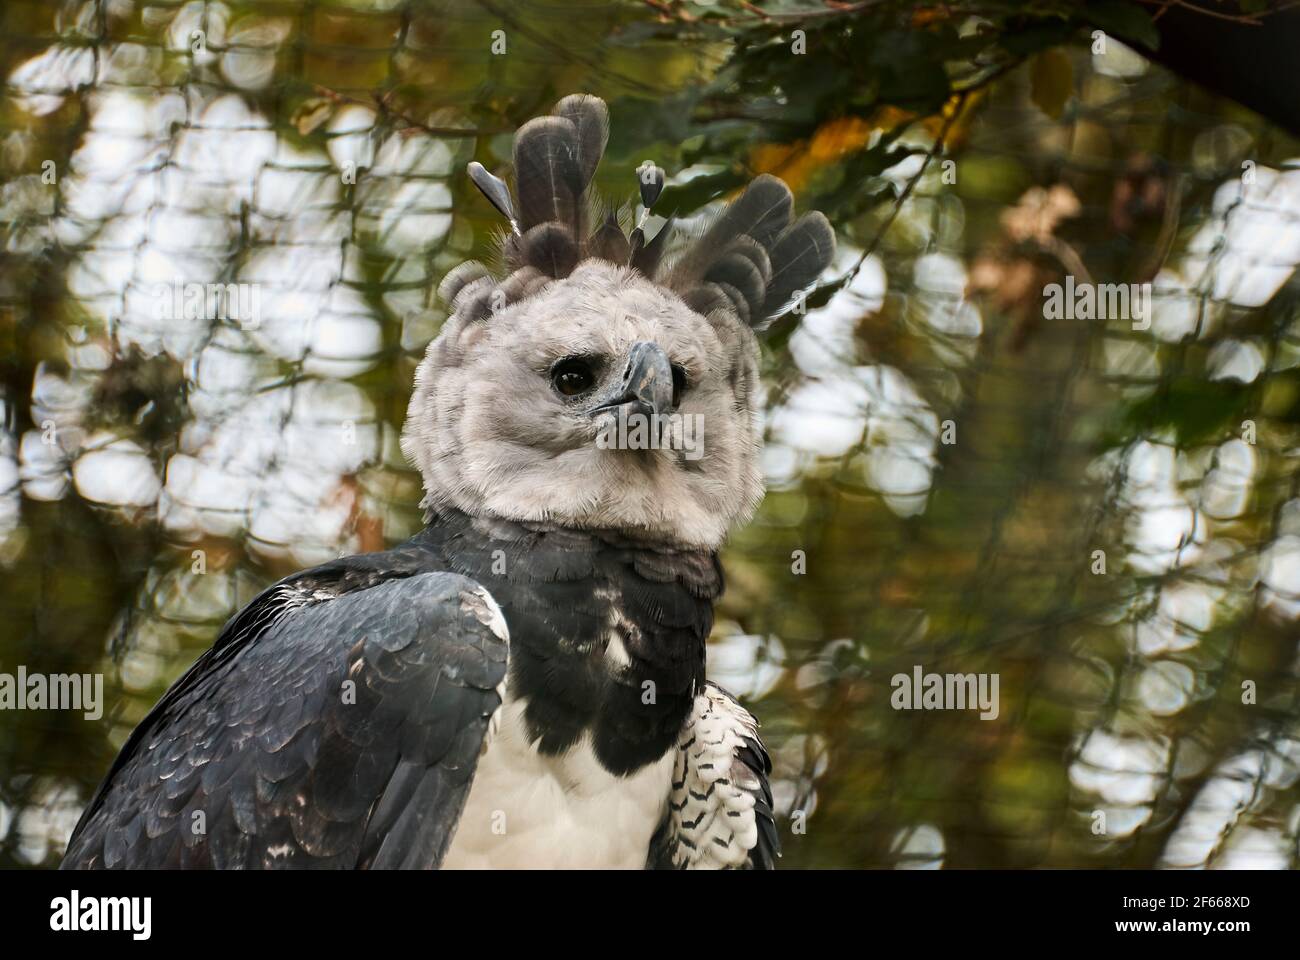 The harpy eagle, Harpia harpyja is also called the American harpy